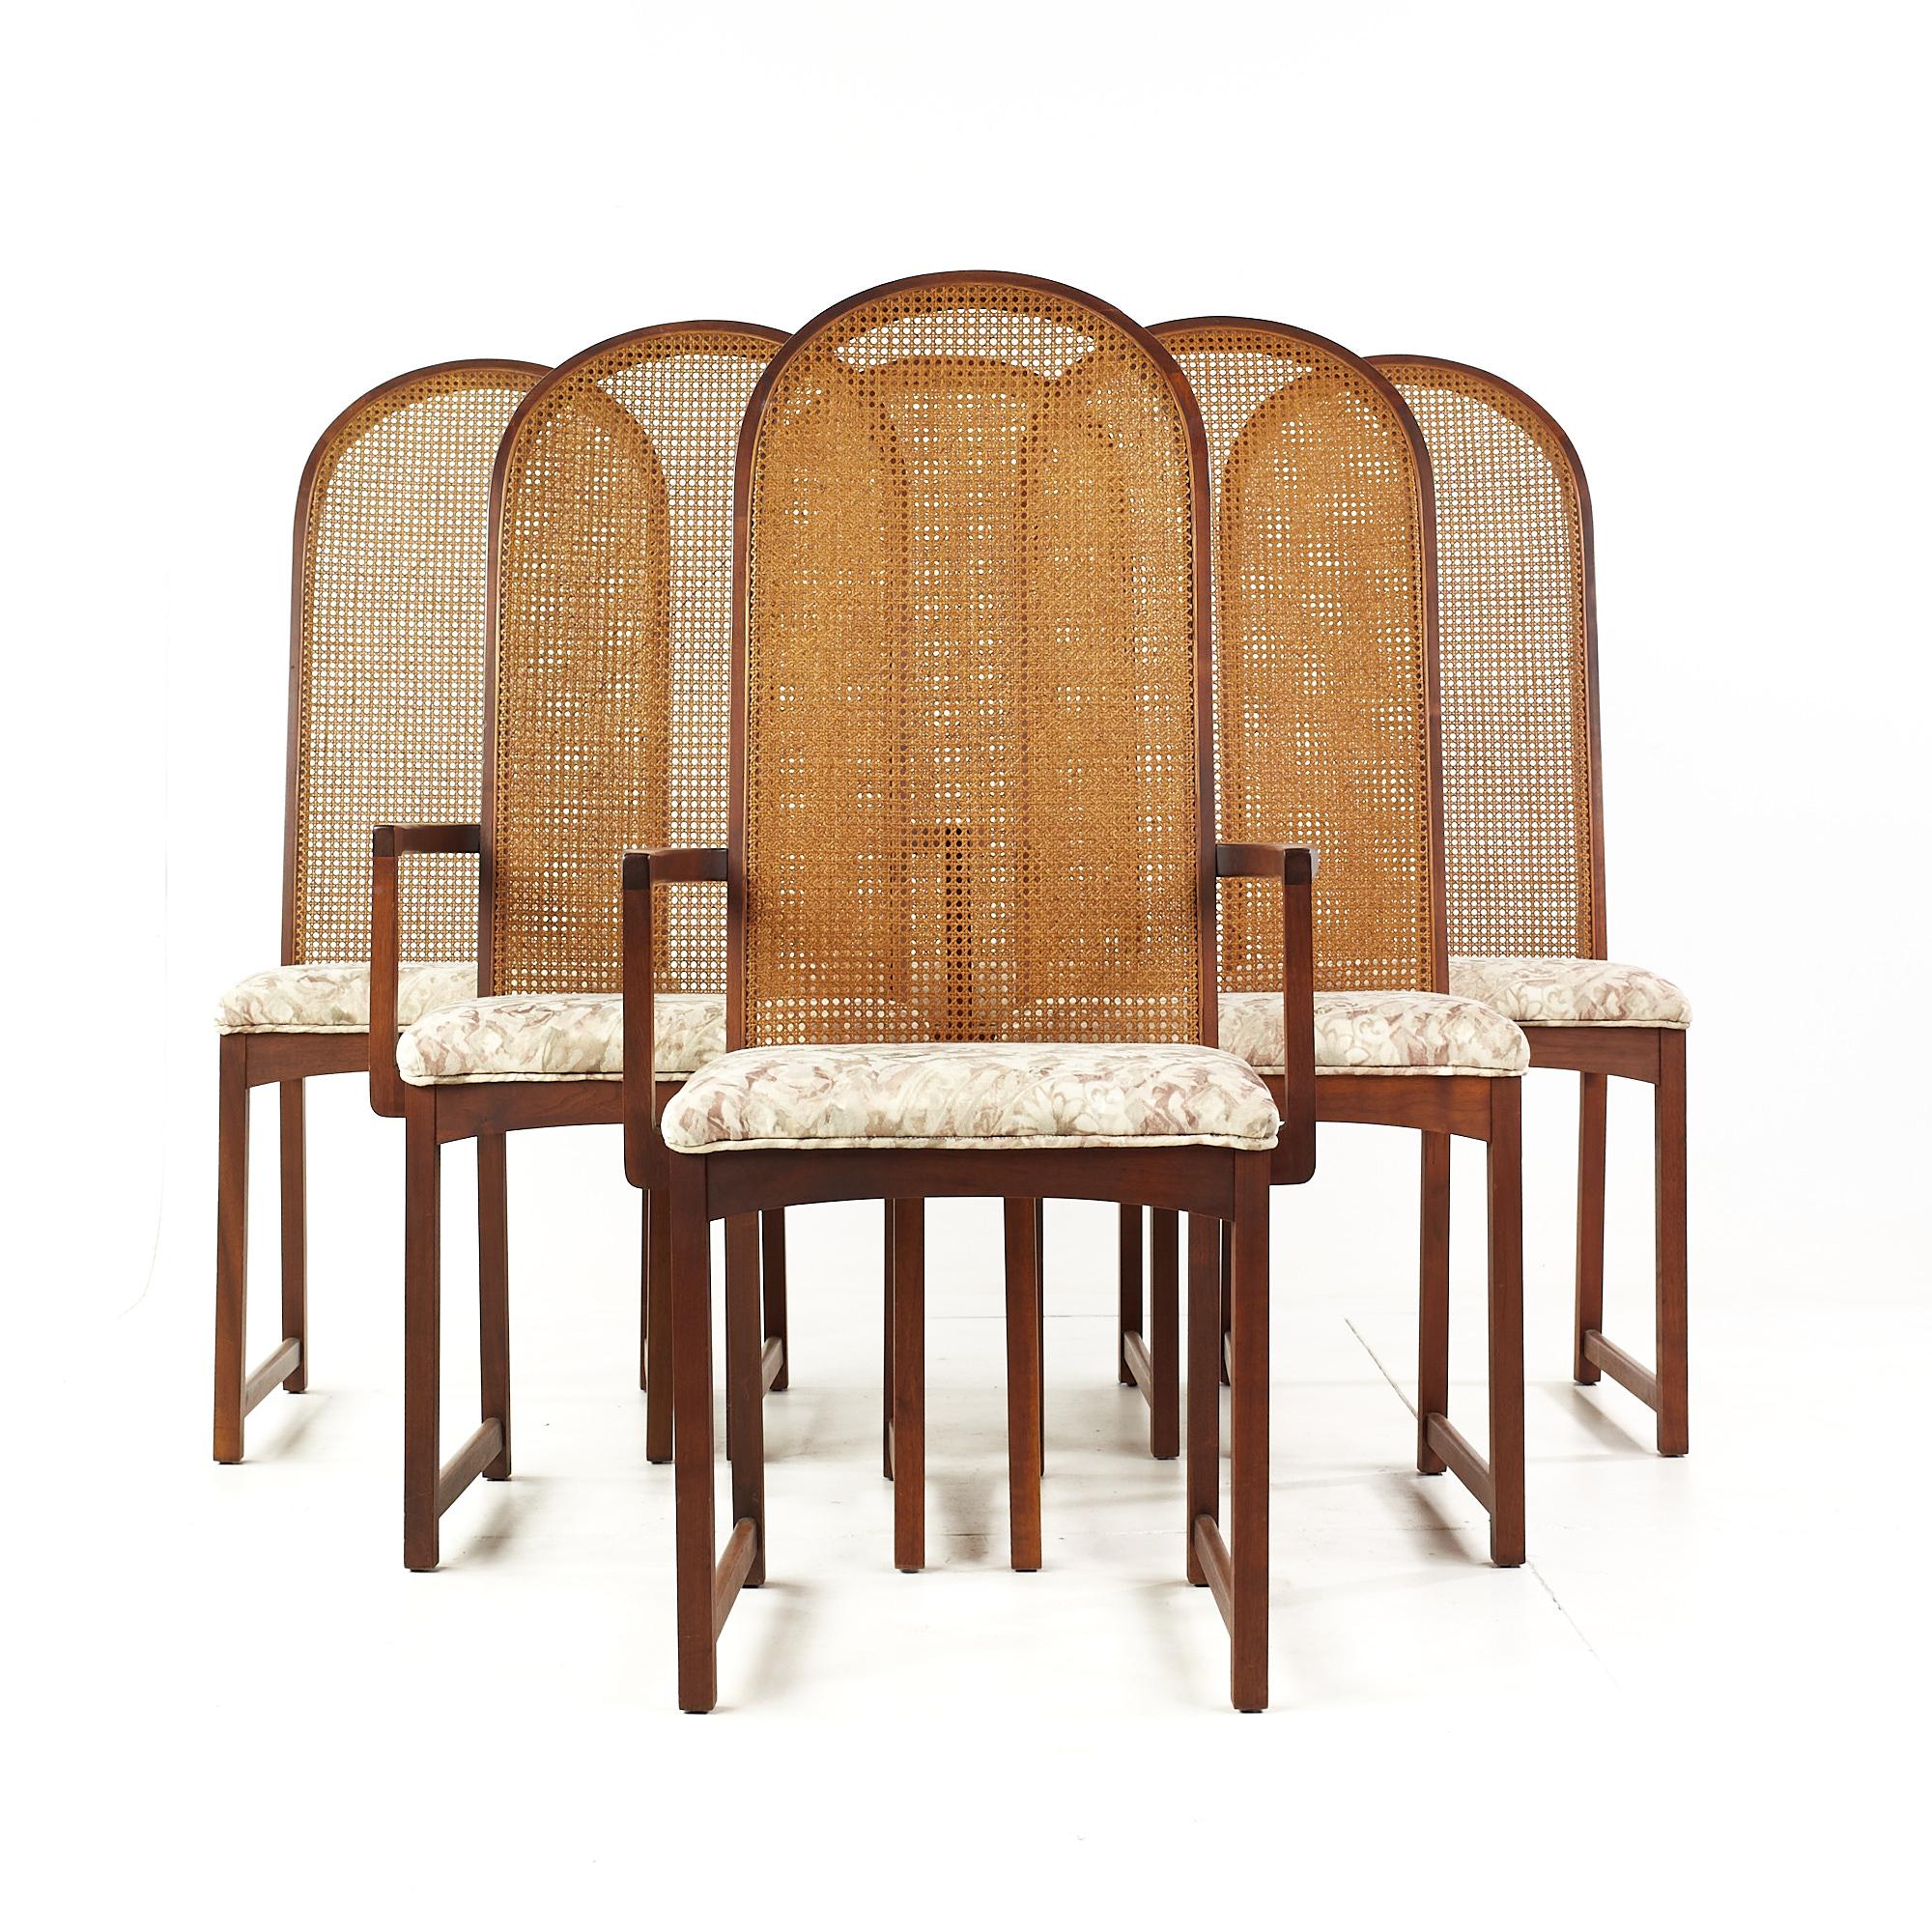 Milo Baughman for Directional Mid Century Walnut and Cane Back Dining Chairs - Set of 6

Each armless chair measures: 18 wide x 25 deep x 44.5 high, with a seat height of 18.5 inches
Each captains chair measures: 22 wide x 25 deep x 44.5 high, with